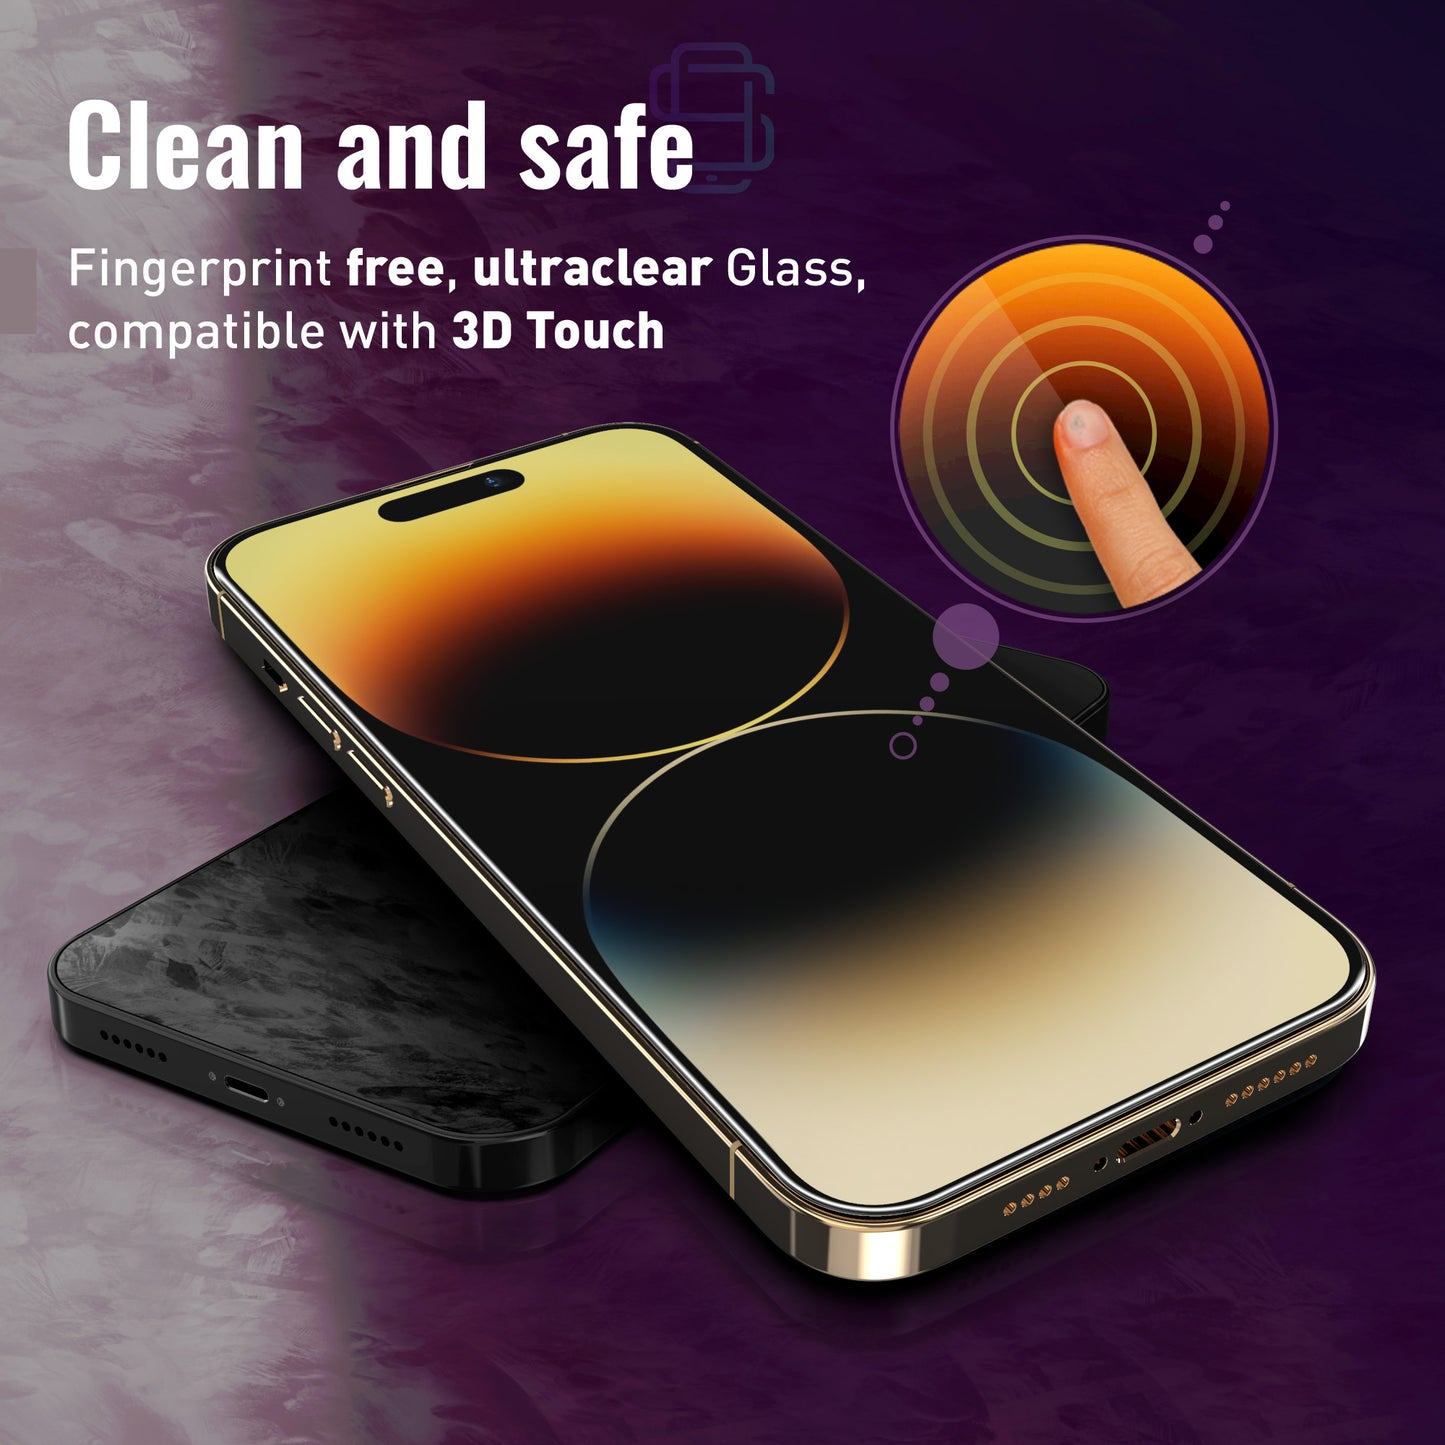 Defenslim iPhone 14 Pro Max Screen Protector [2-Pack] with Easy Auto-Align Install Kit